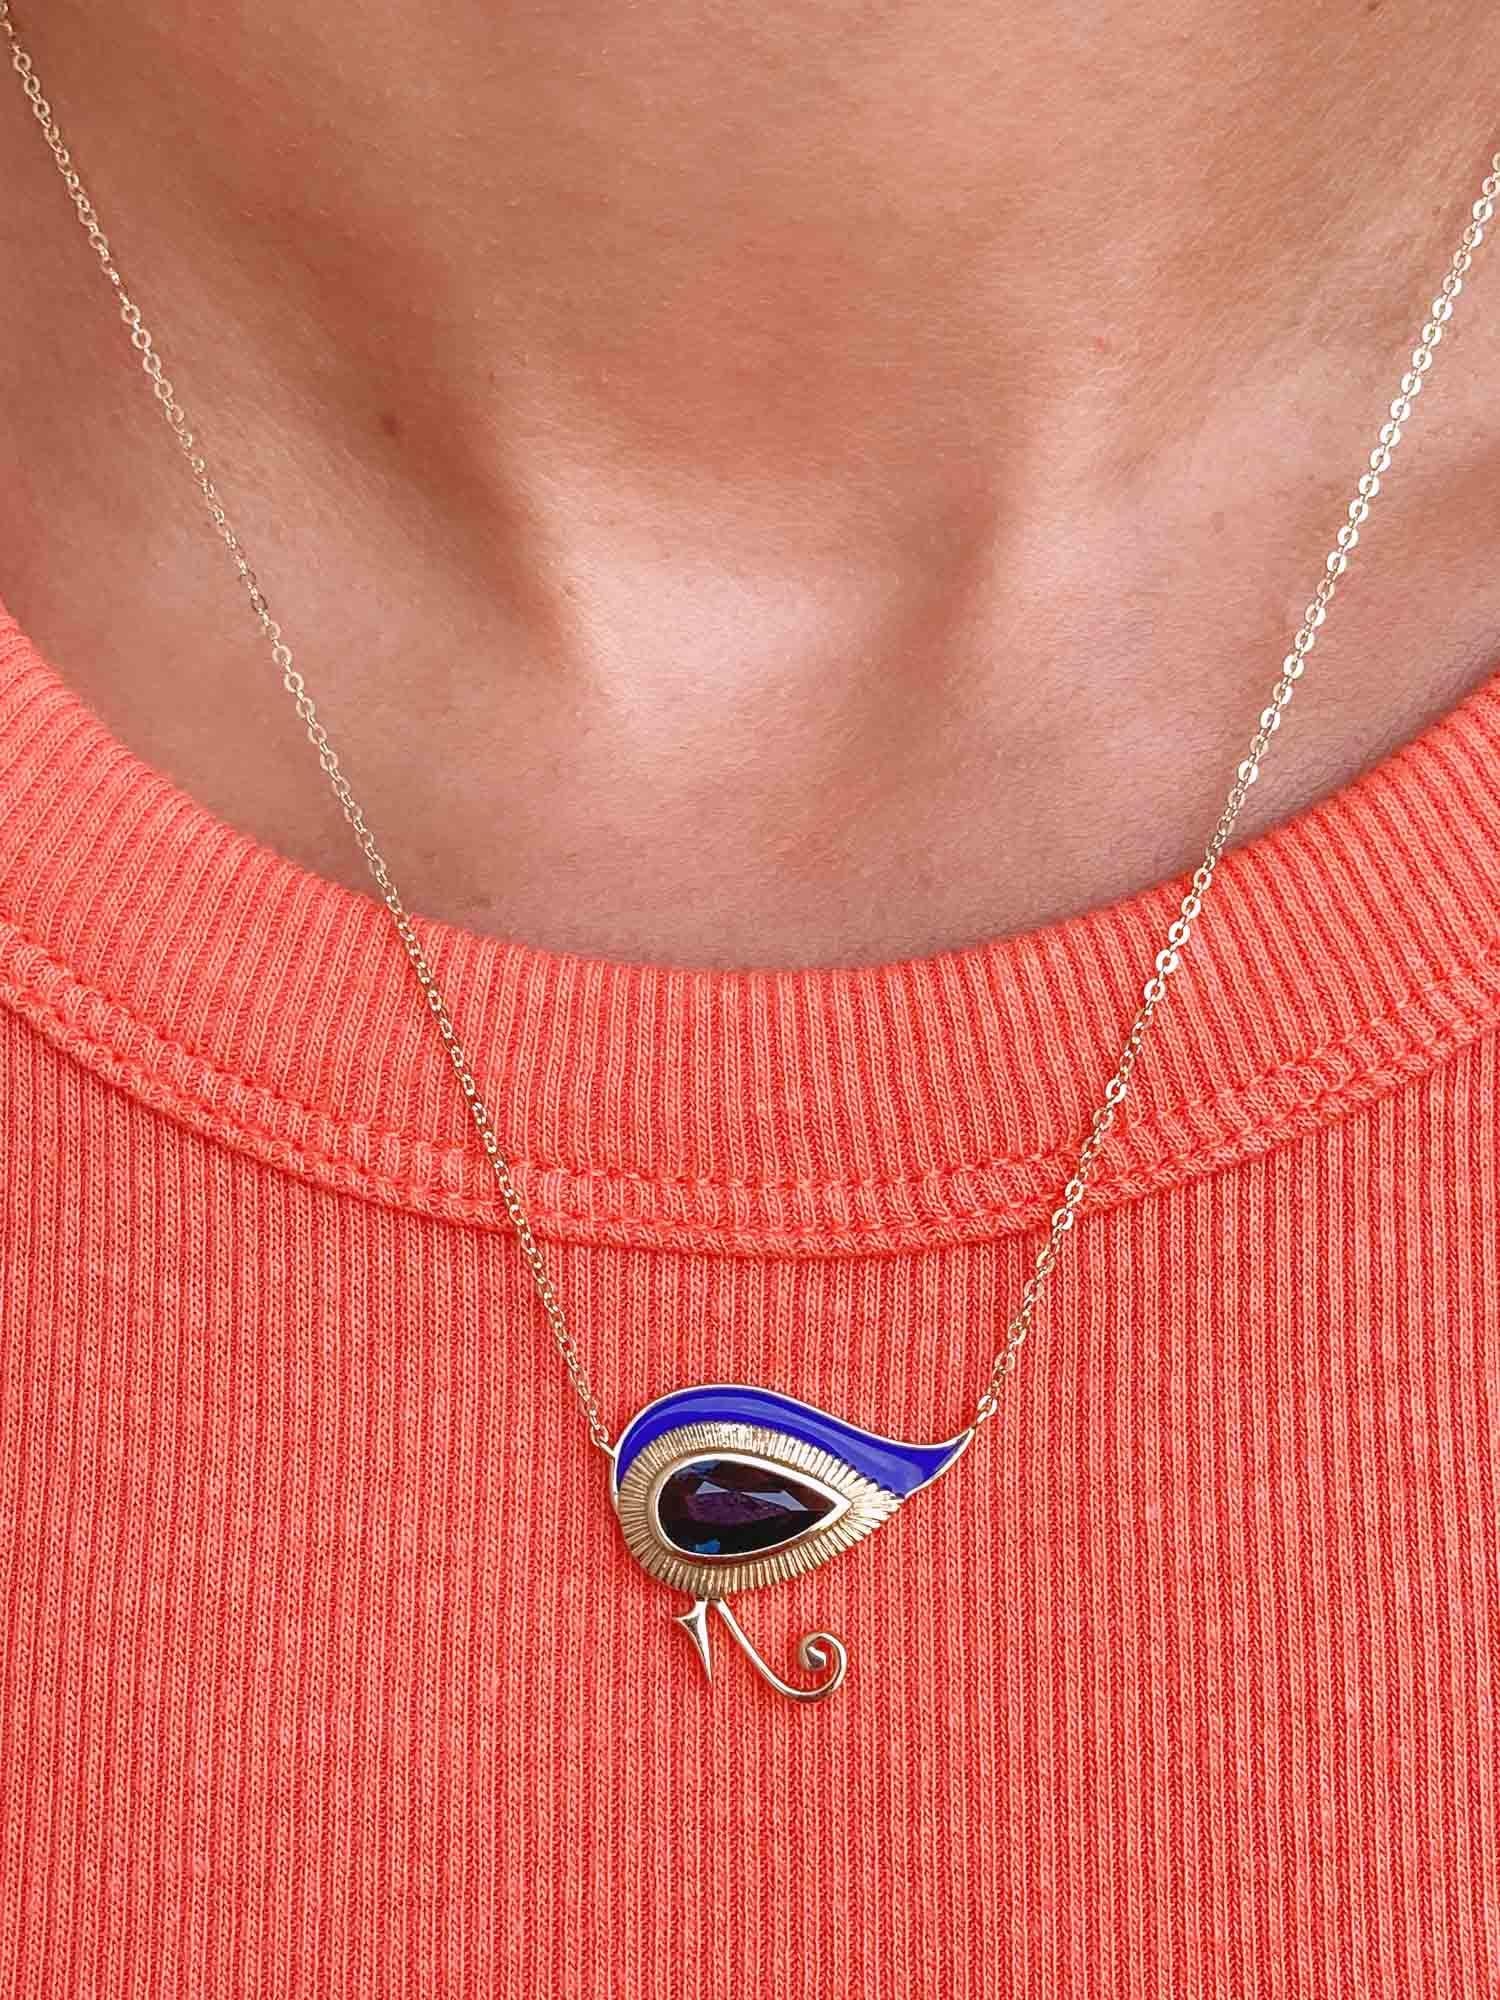 Eye of Horus 1.82 Ct Nigerian Sapphire with Blue Enamel 9k Gold Necklace R4262 In New Condition For Sale In Osprey, FL